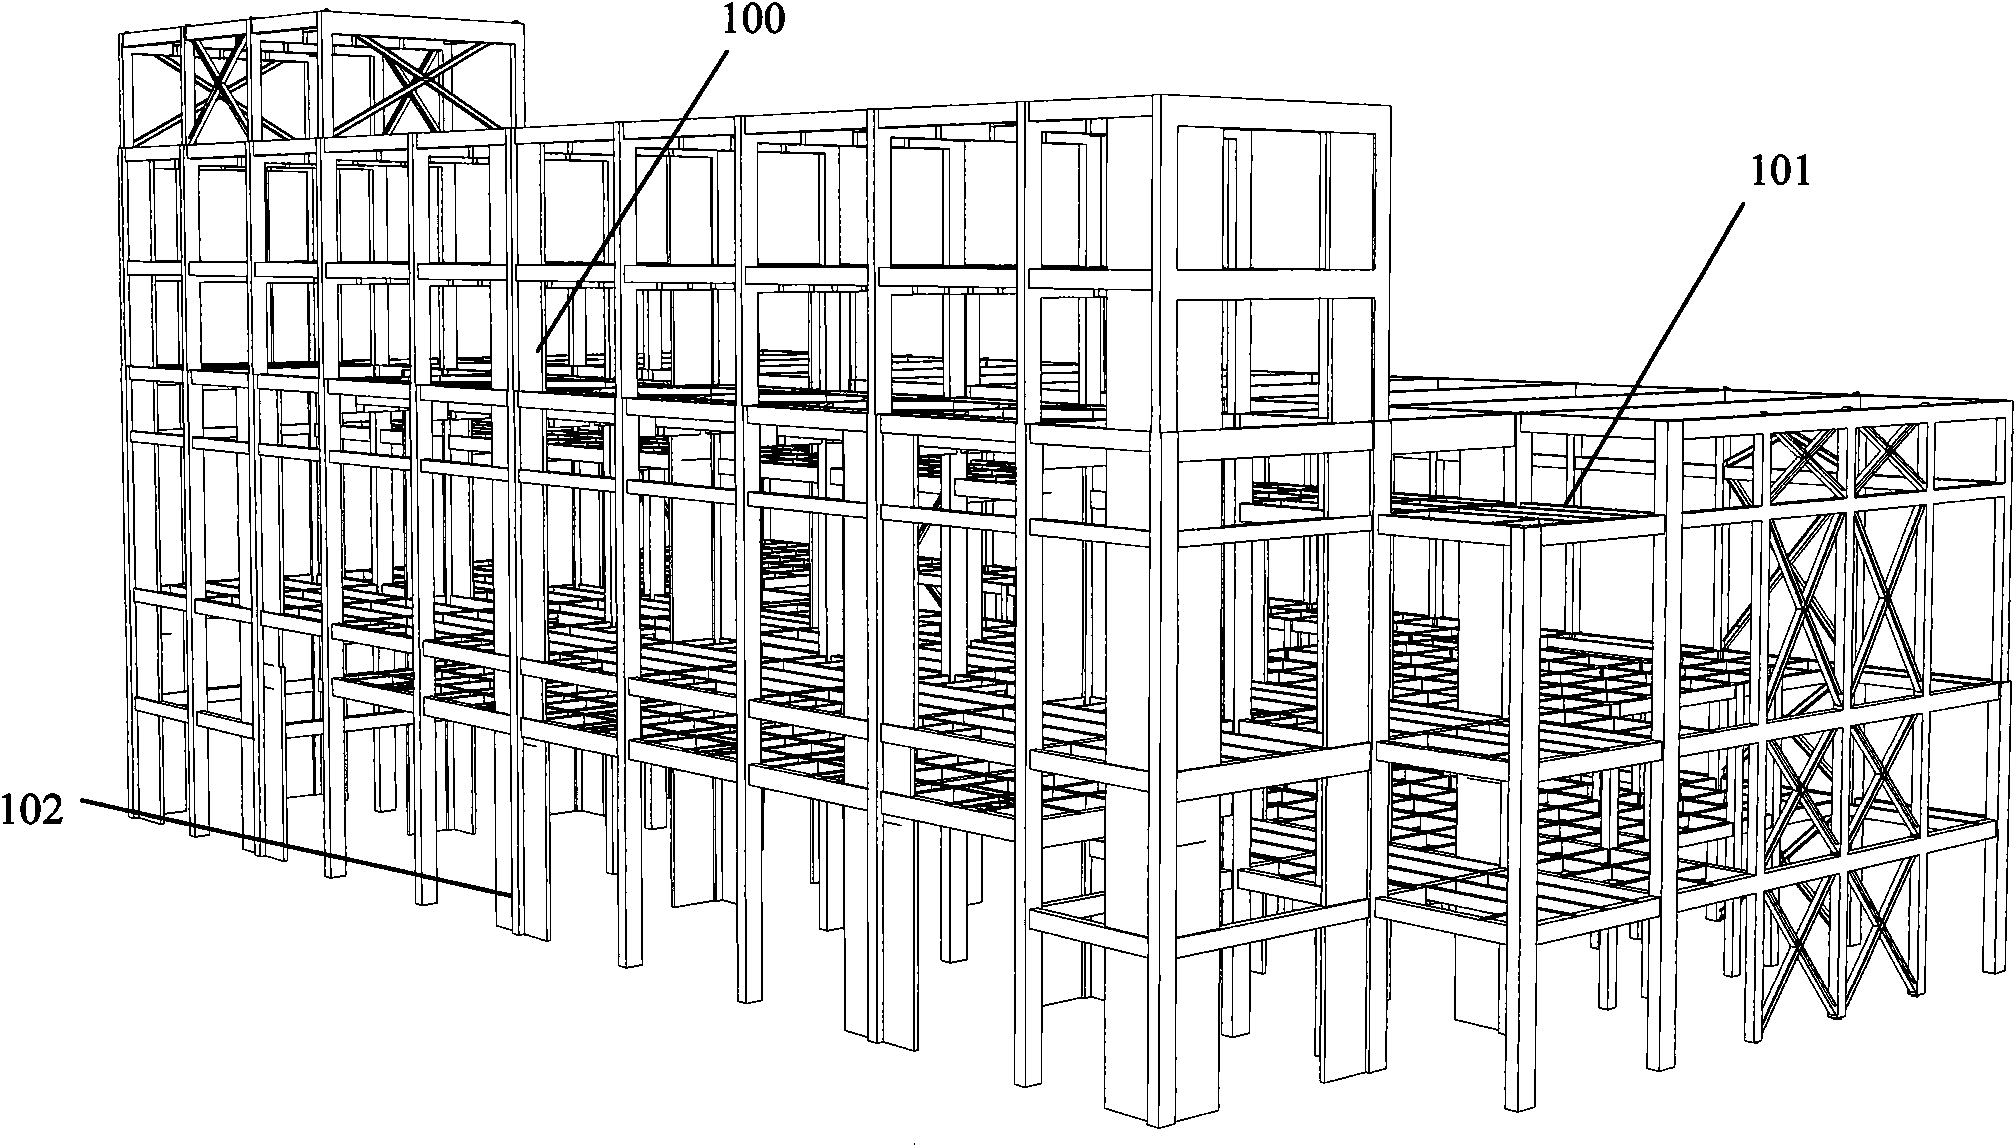 Main factory building structure system for large-scale thermal power plant